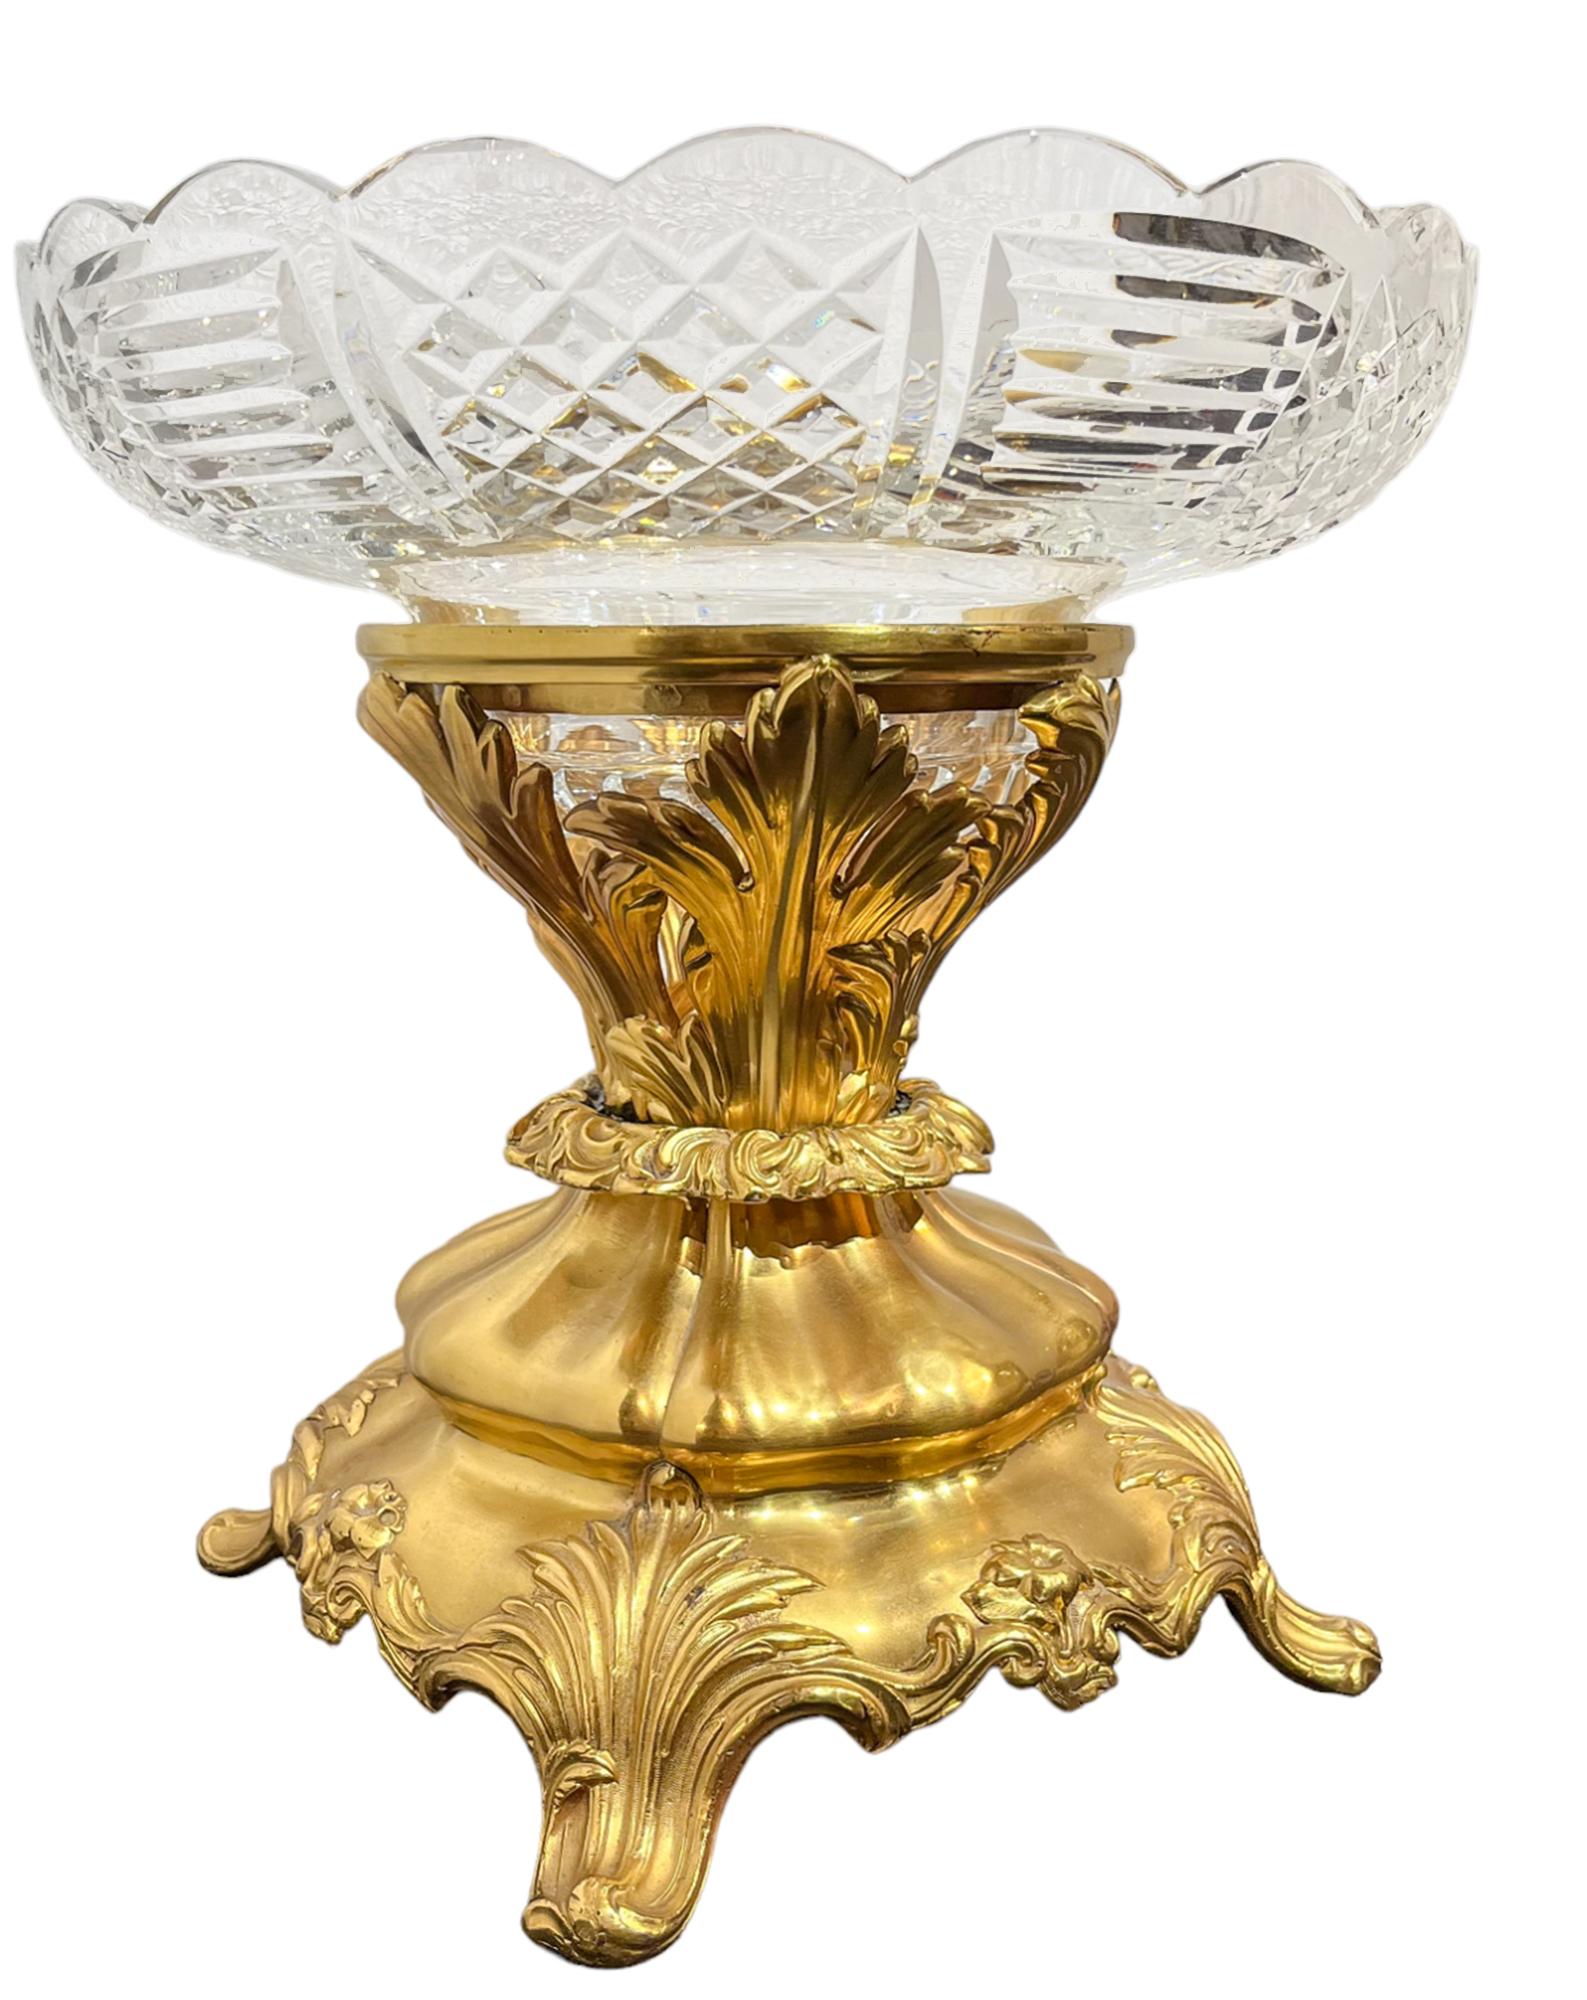 Ornate glass bowl centerpiece with with gilt metal base. The glass is intricately cut with a with a lattice design, with bases ornamented with curving, natural, forms inspired by foliage. 

Origin: French
Date: 19th century
Dimension: 10 1/2 in. x